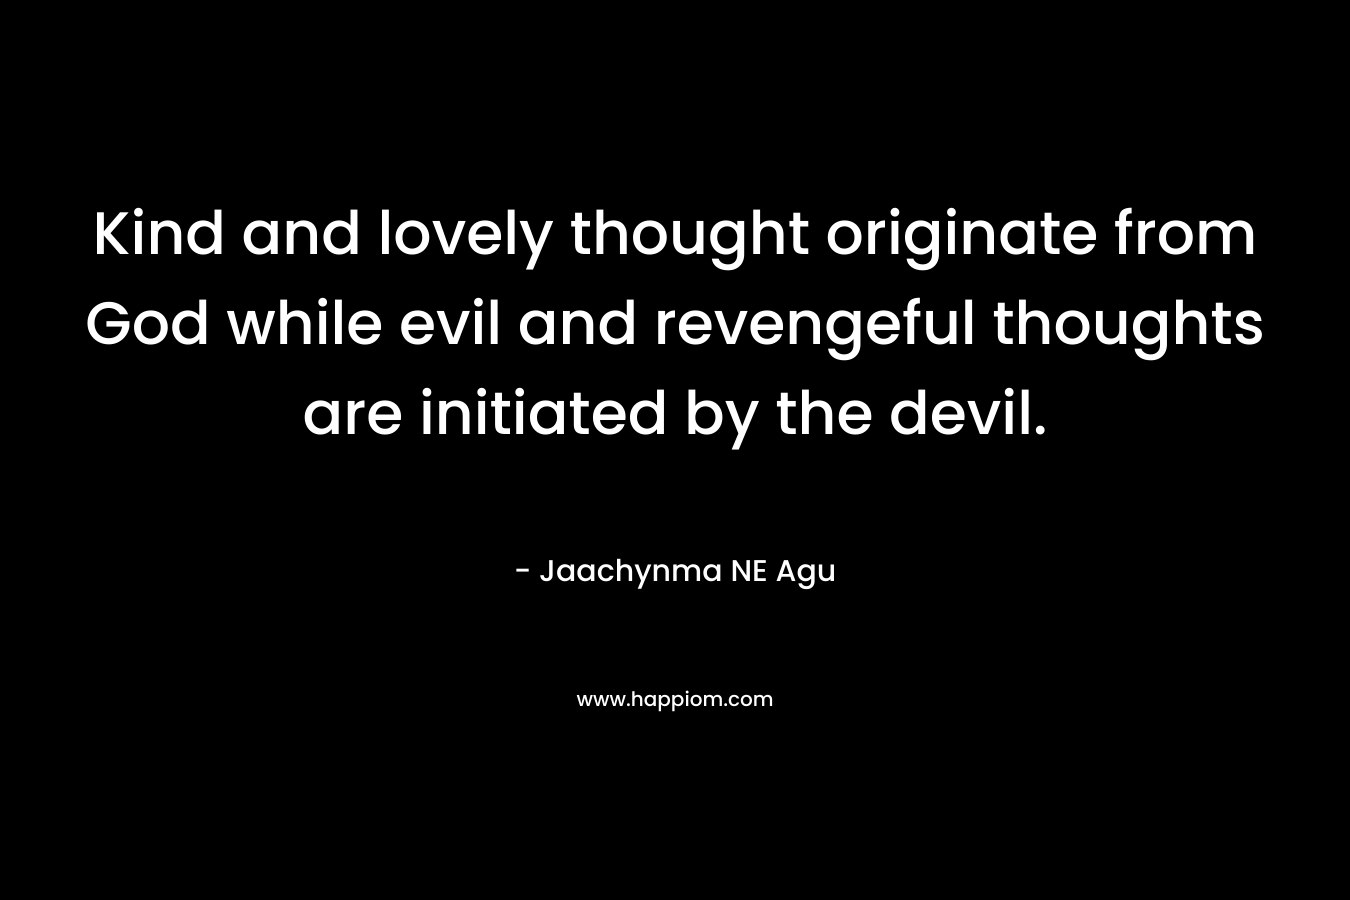 Kind and lovely thought originate from God while evil and revengeful thoughts are initiated by the devil.